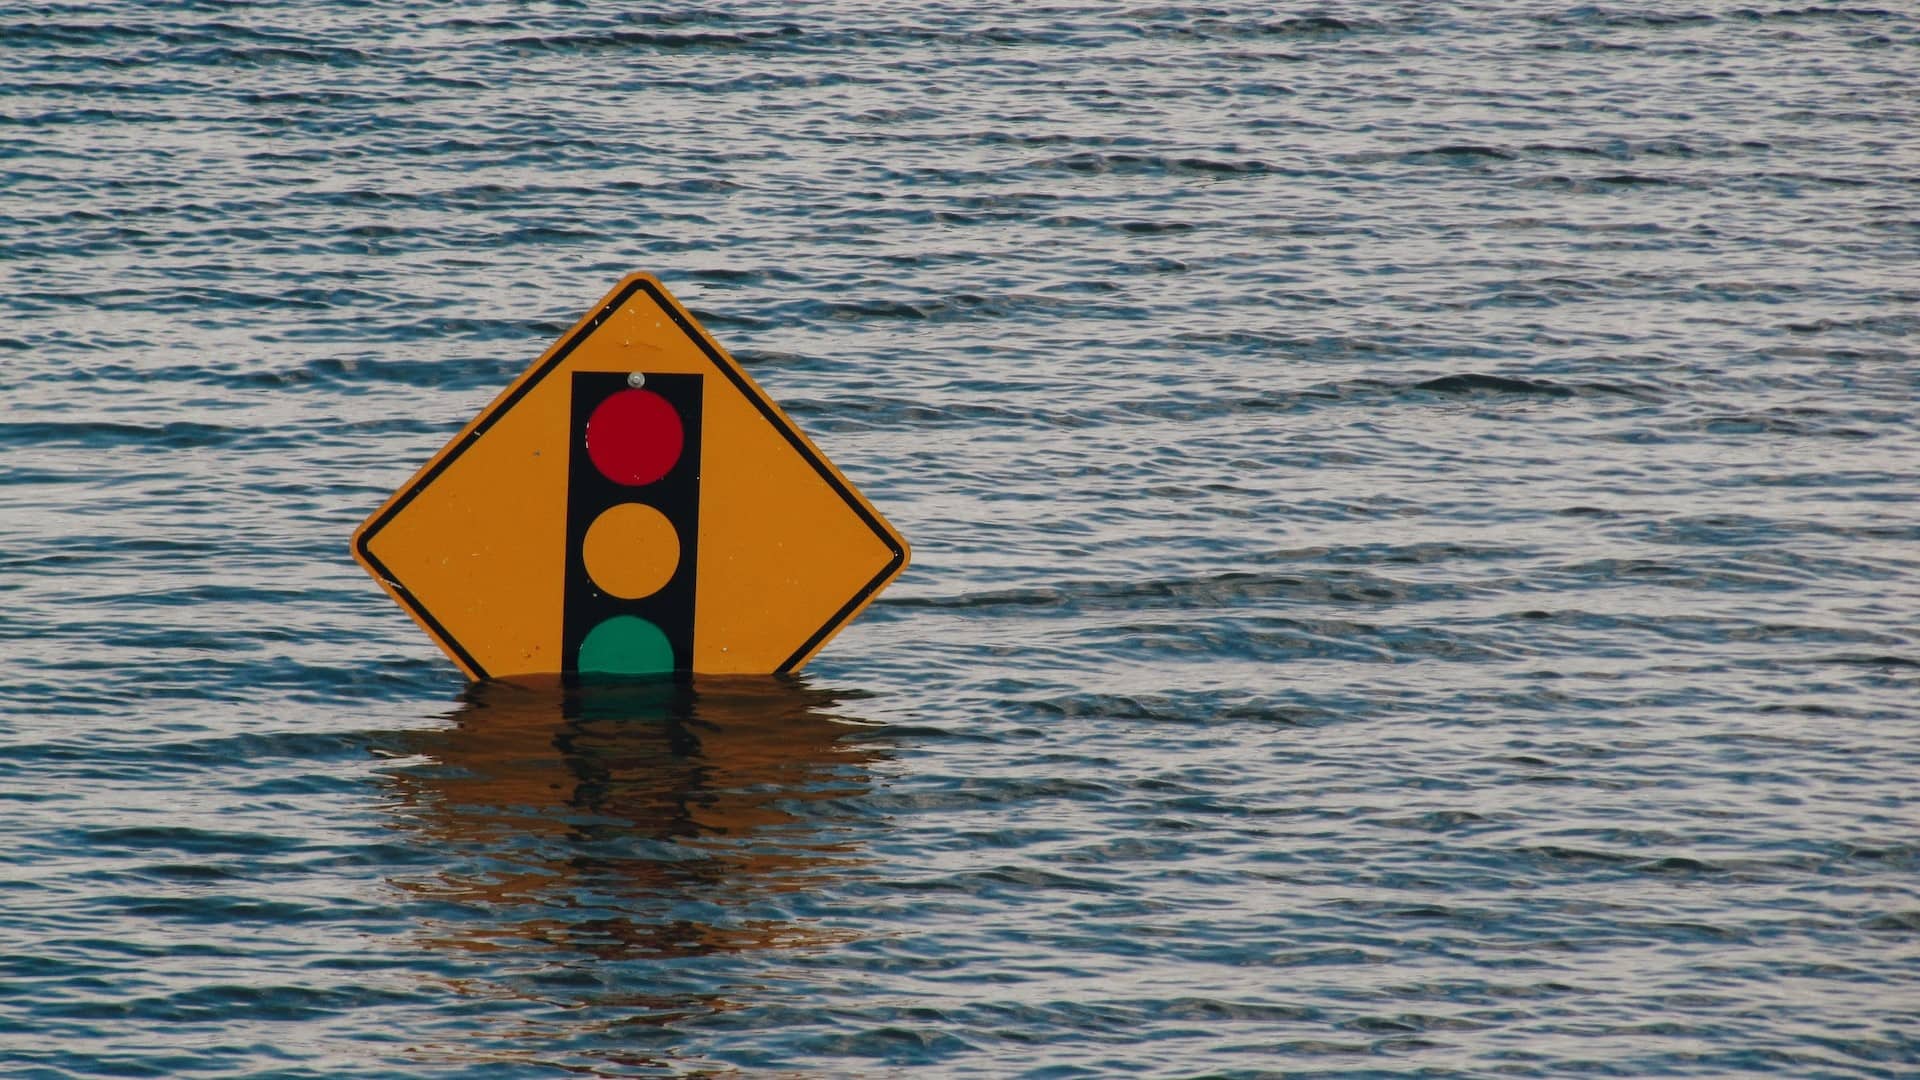 Image: A stop sign half submerged in water. Is it a good thing, or a bad thing?